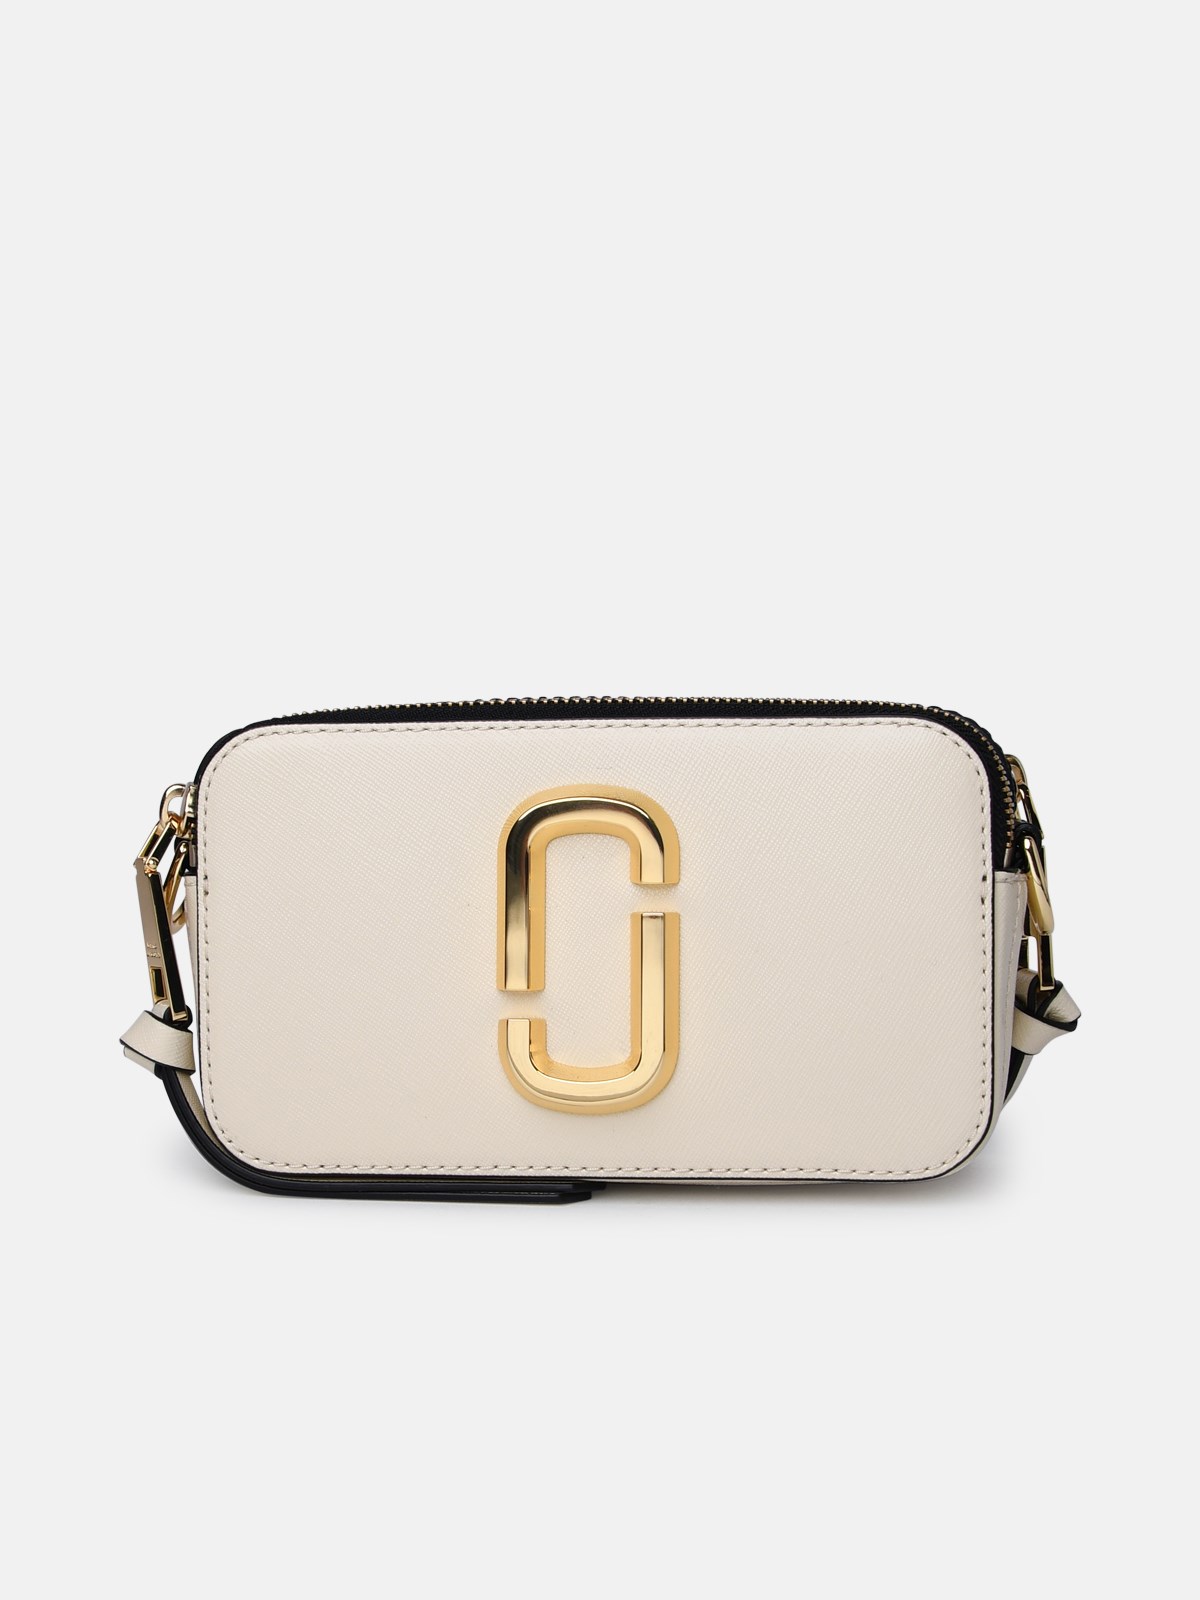 Marc Jacobs Ivory Leather Bag